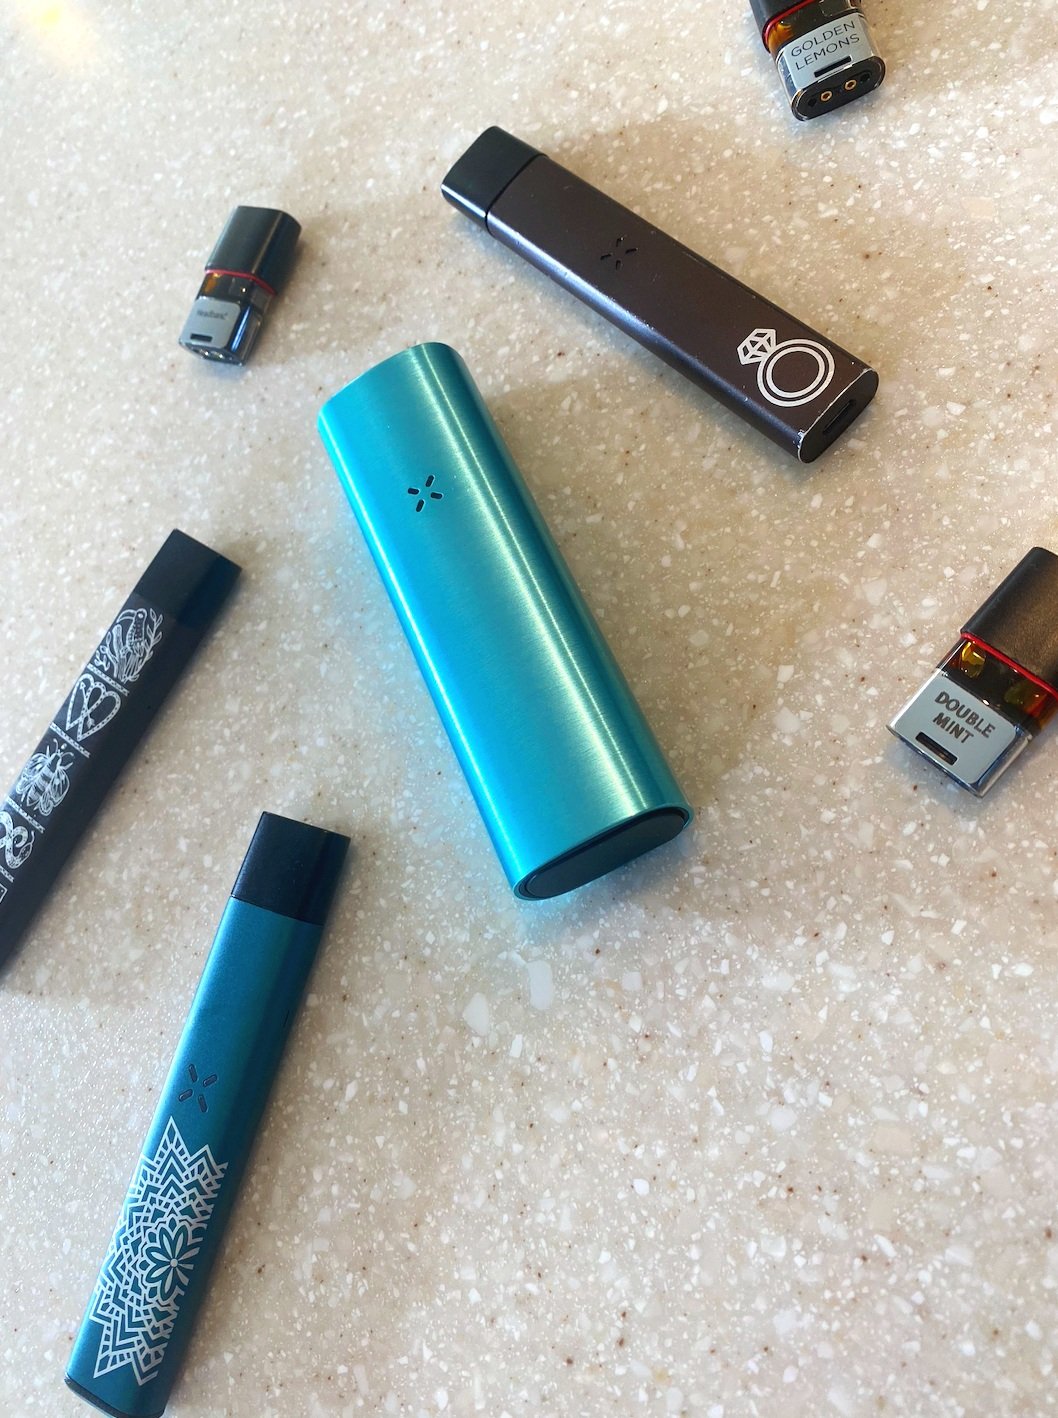 My Go-To Brand for Vape Accessories: PAX